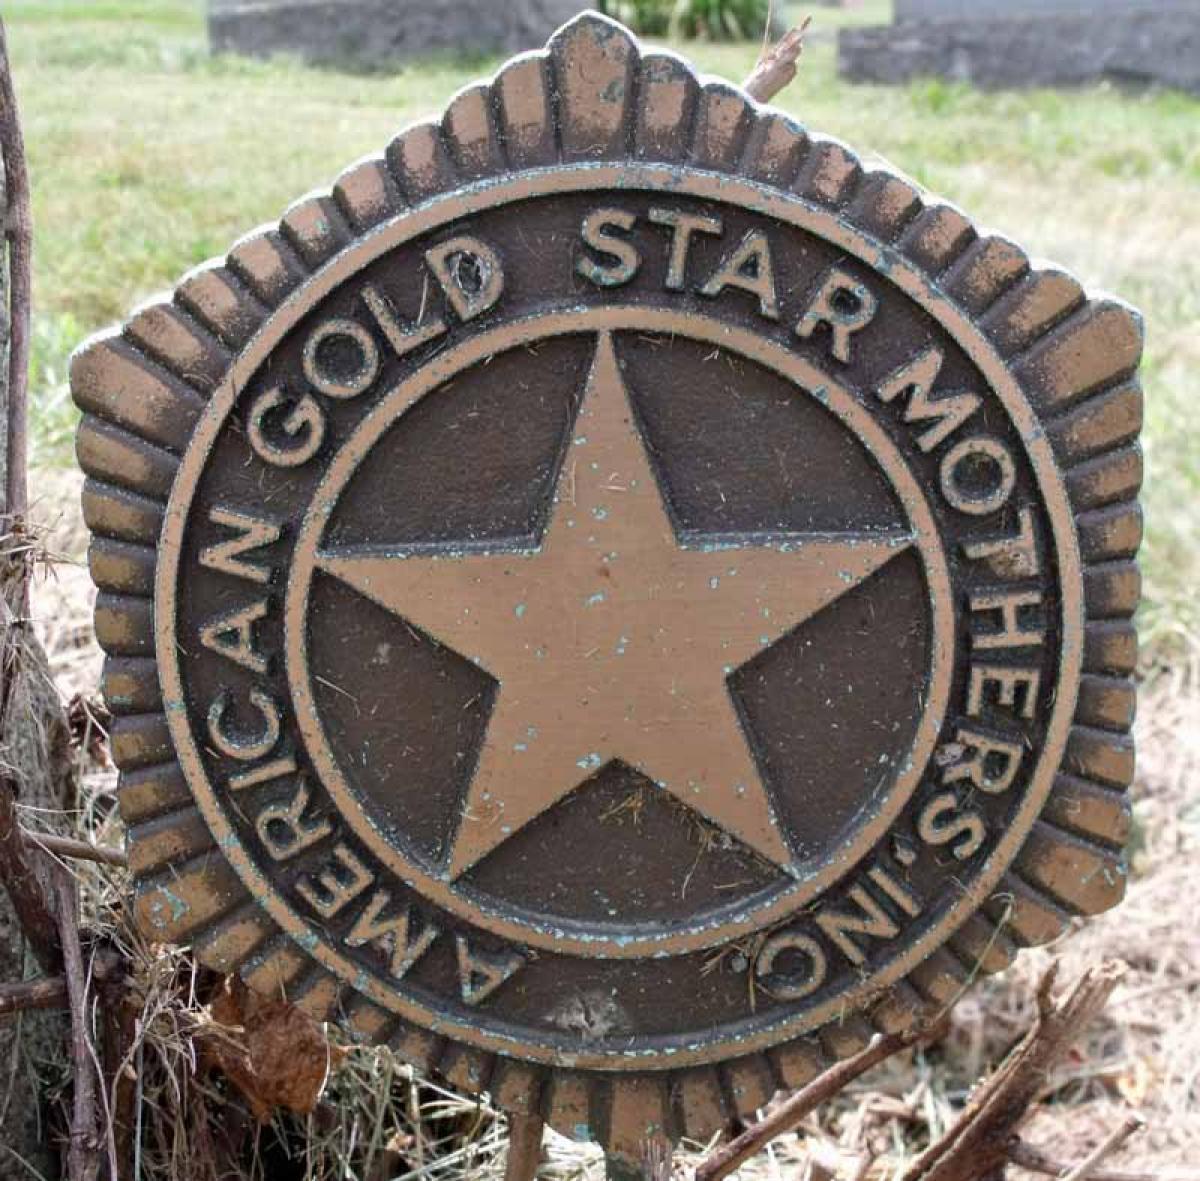 OK, Grove, Headstone Symbols and Meanings, American Gold Star Mothers